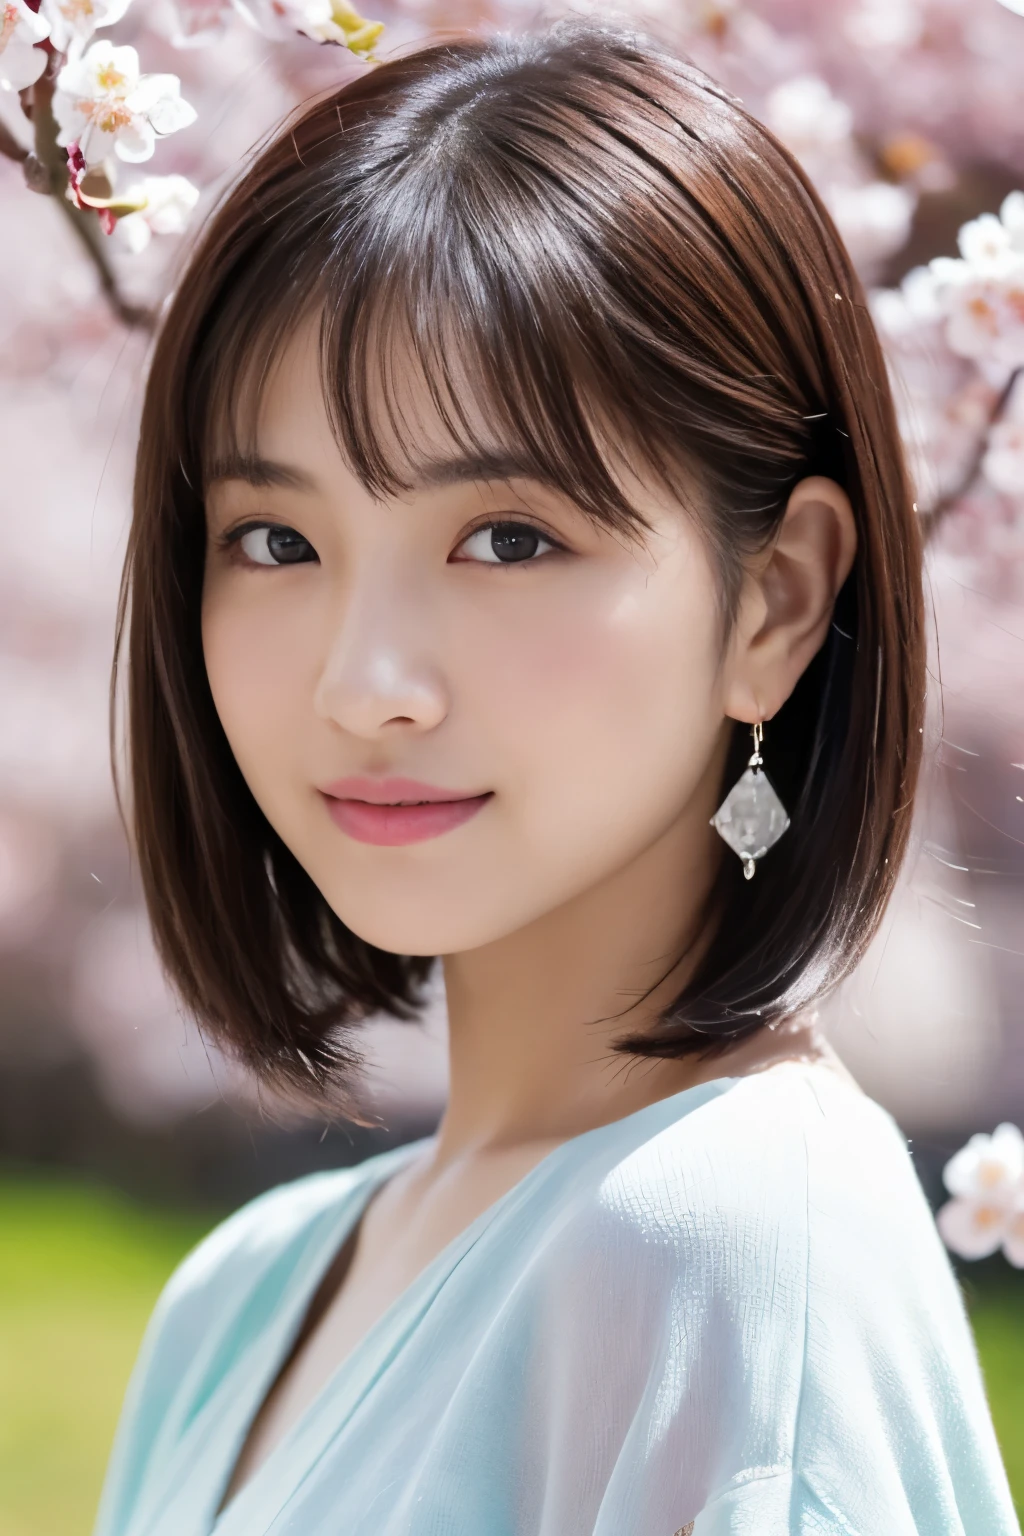 1 girl, (Spring outfit in pastel colors:1.2), beautiful japanese actress, 
looks great in the photo, Yukihime, long eyelashes, snowflake earrings,
(RAW photo, highest quality), (realistic, Photoreal:1.4), (table top), 
beautiful and detailed eyes, thick and beautiful lips, highly detailed eyes and face, 
BREAK
(A girl admiring plum blossoms:1.3), 
(Plum blossom), (blue sky),
dramatic lighting, great atmosphere, 
BREAK 
Perfect Anatomy, slender body, small, short hair, parted bangs, angel smile, 
Crystal Skin, clear eyes, Strobe photography, catch light